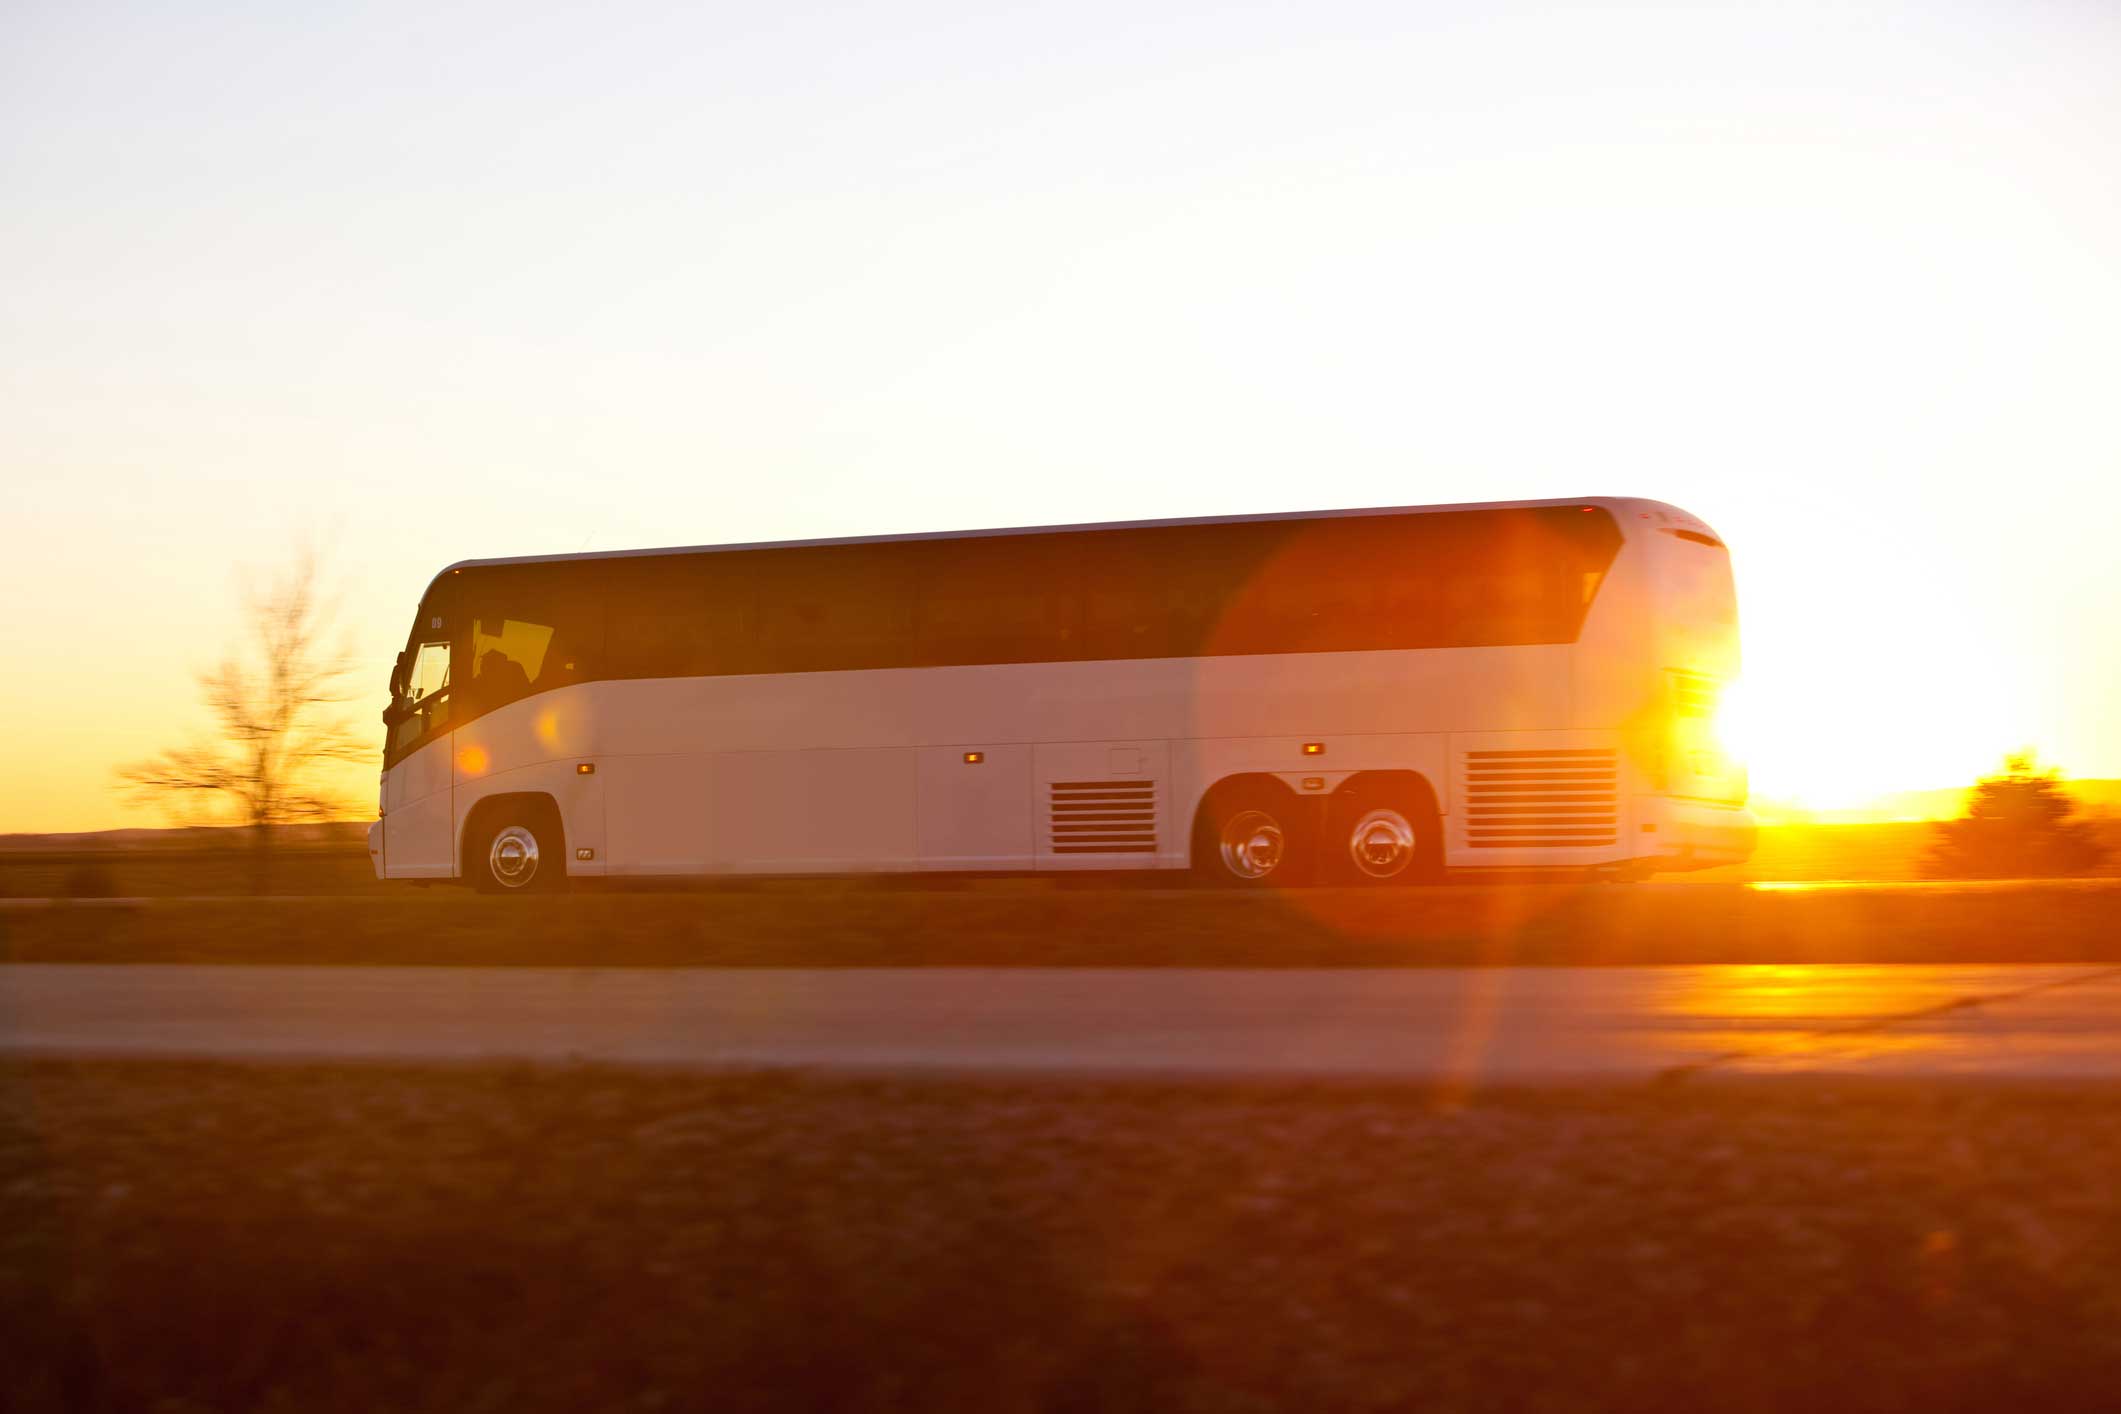 Large bus rental is a service for large groups in Cleveland, Ohio